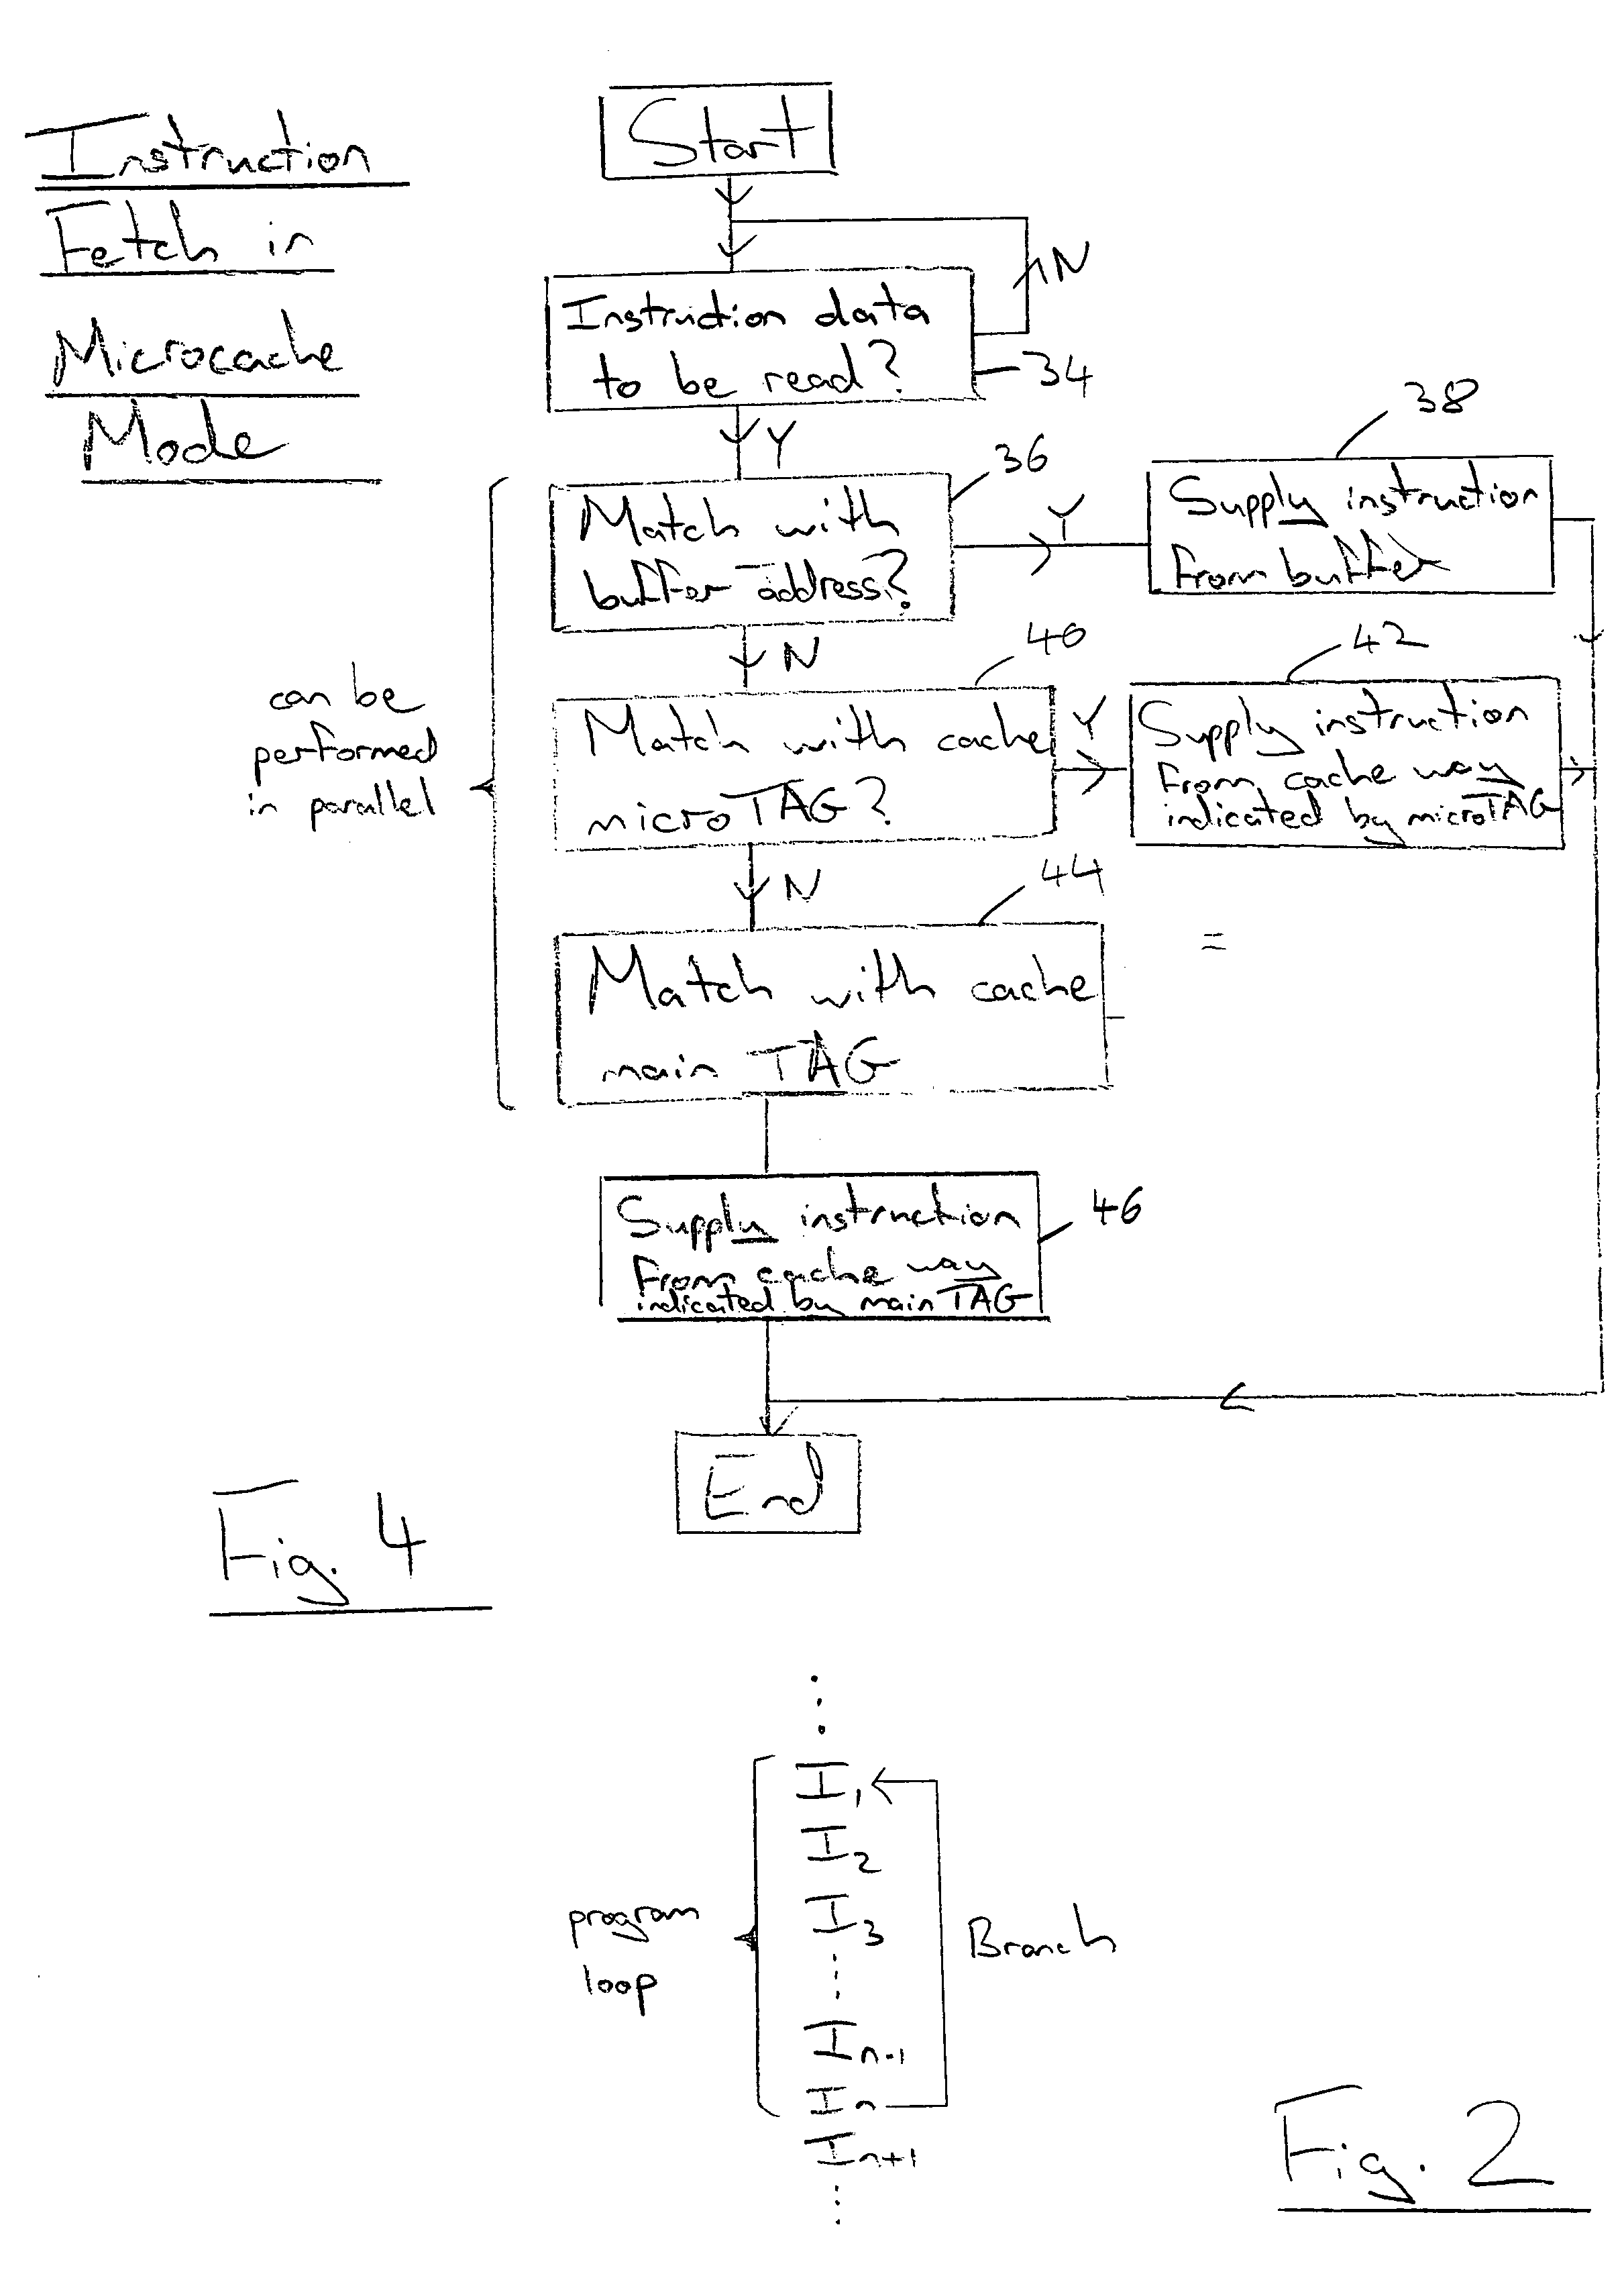 Reusing a buffer memory as a microcache for program instructions of a detected program loop